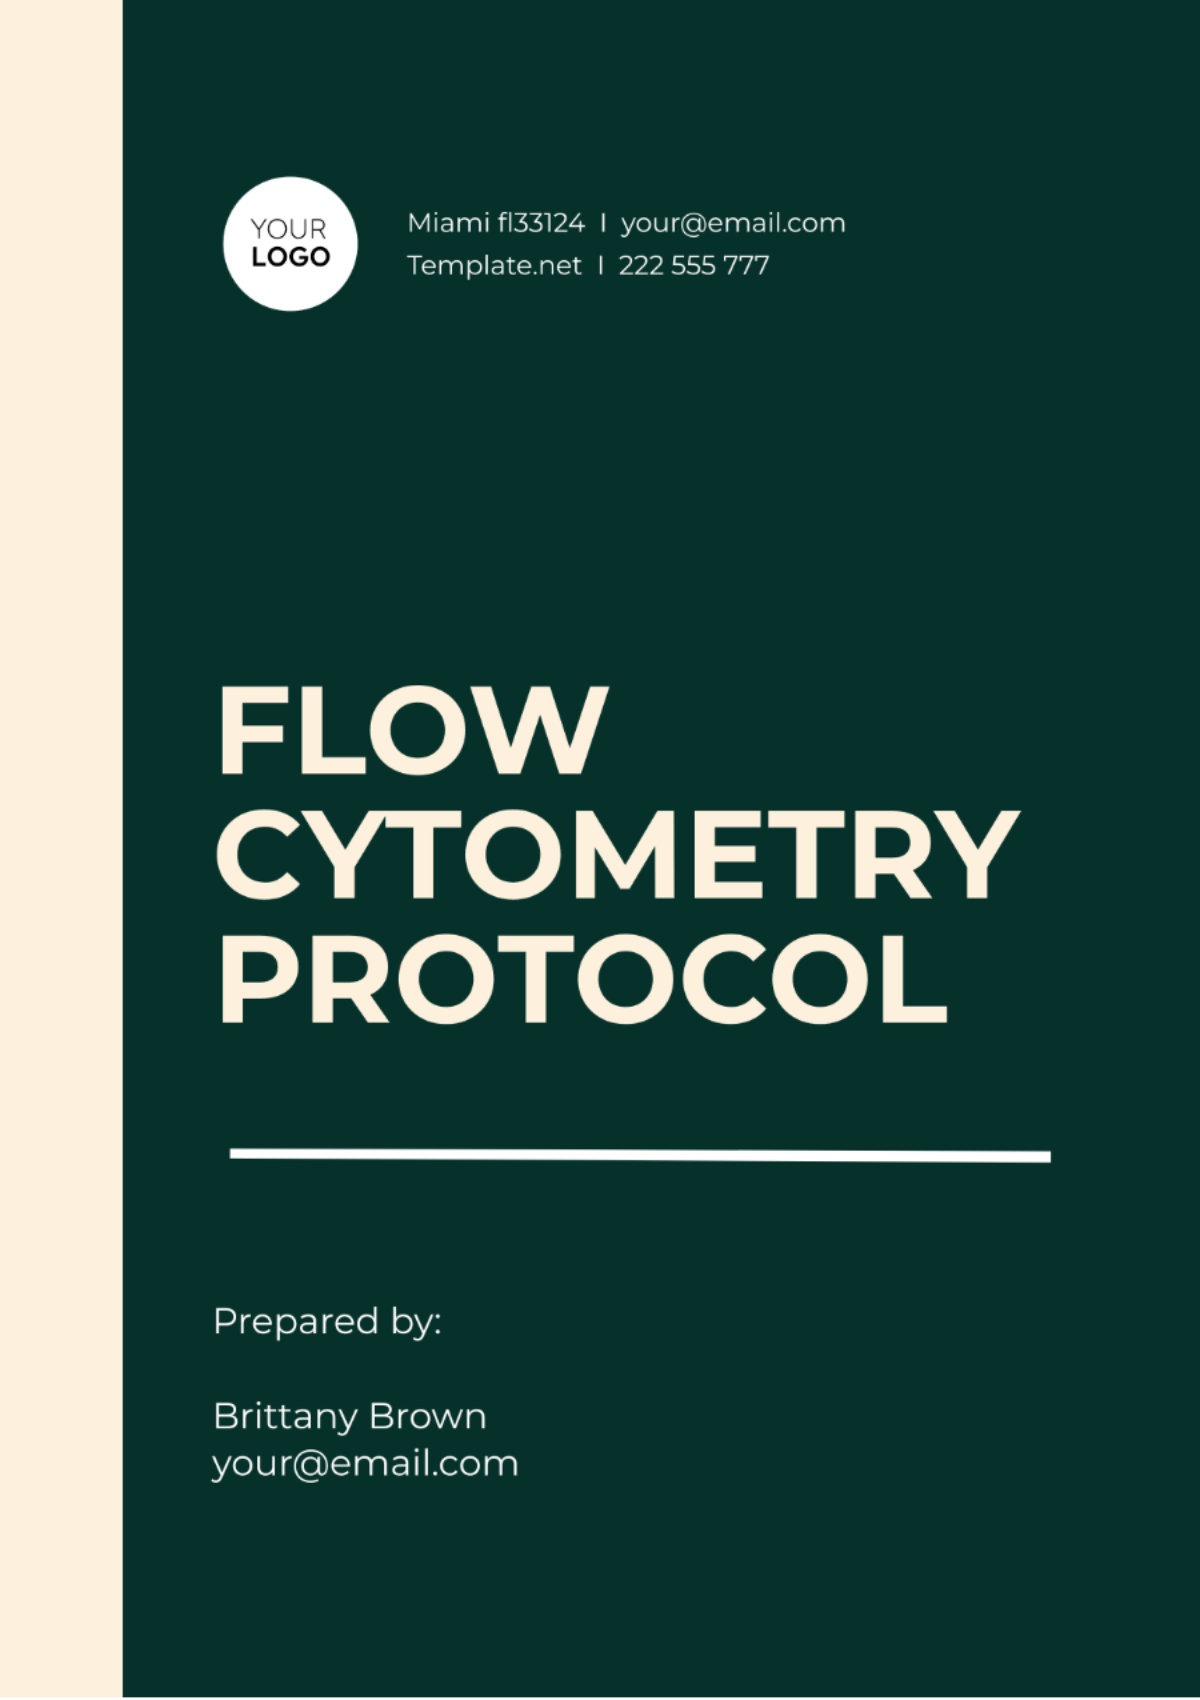 Flow Cytometry Protocol Template